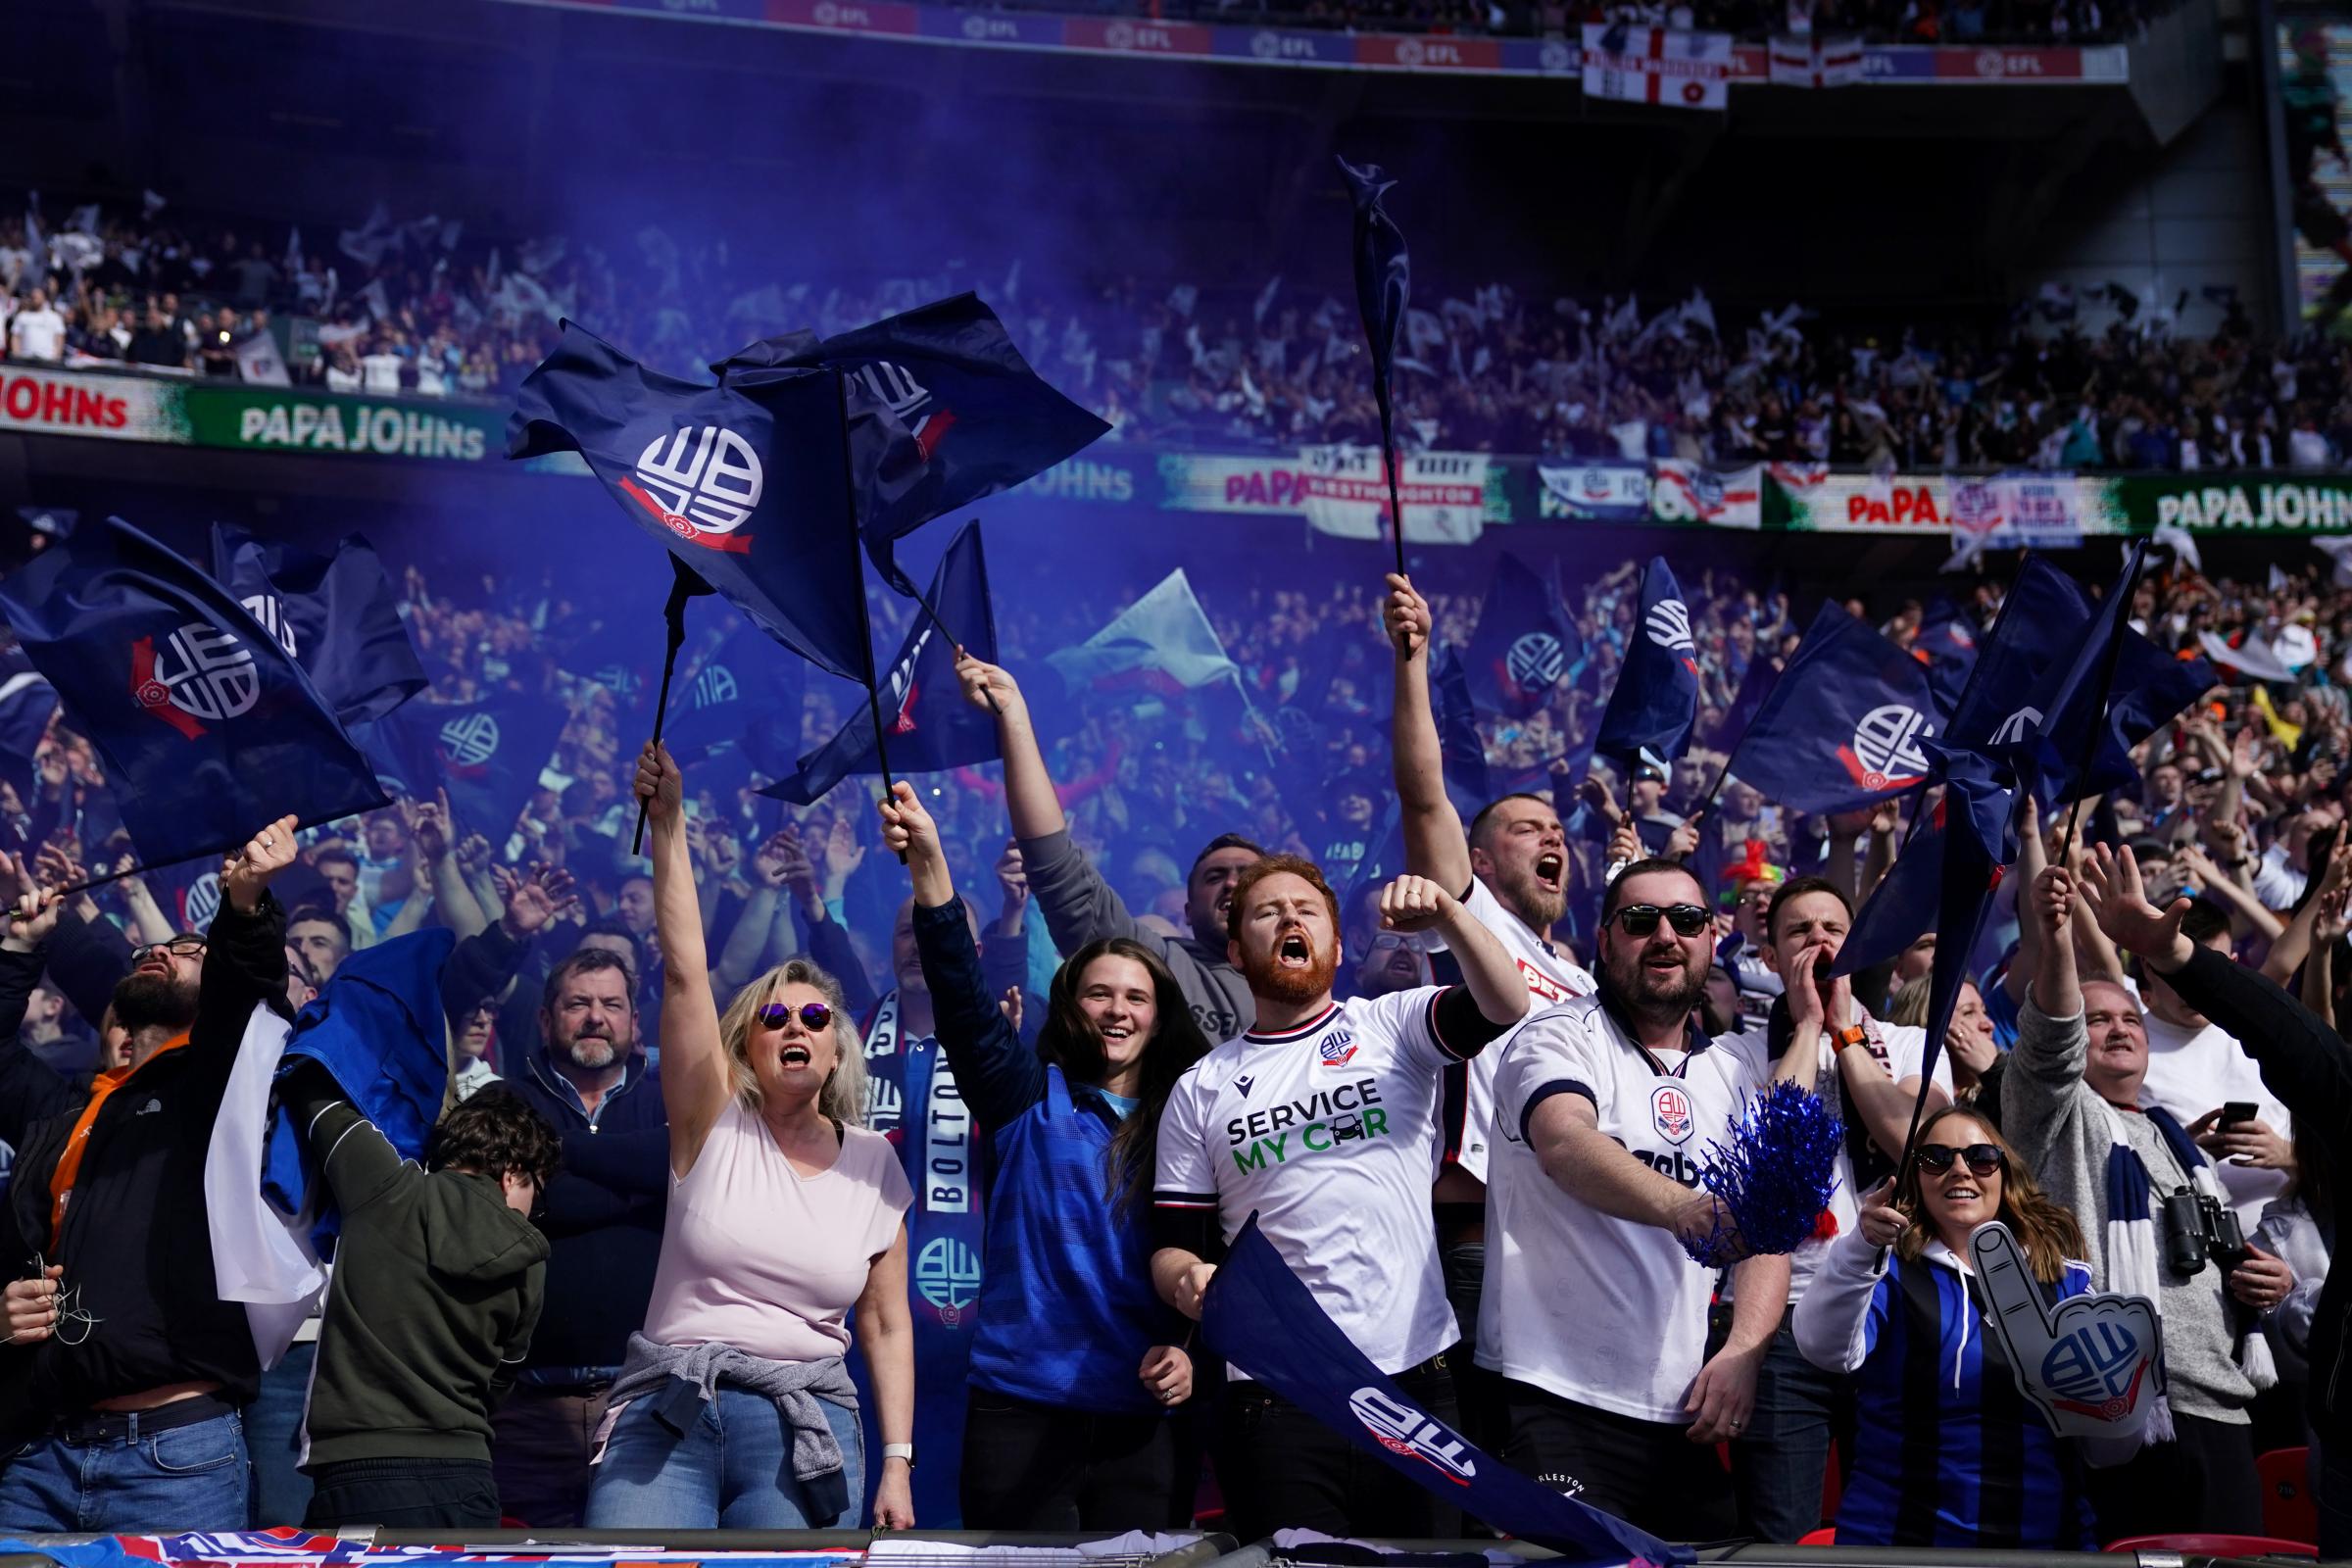 Bolton Wanderers ticket sales continue to rise for Wembley